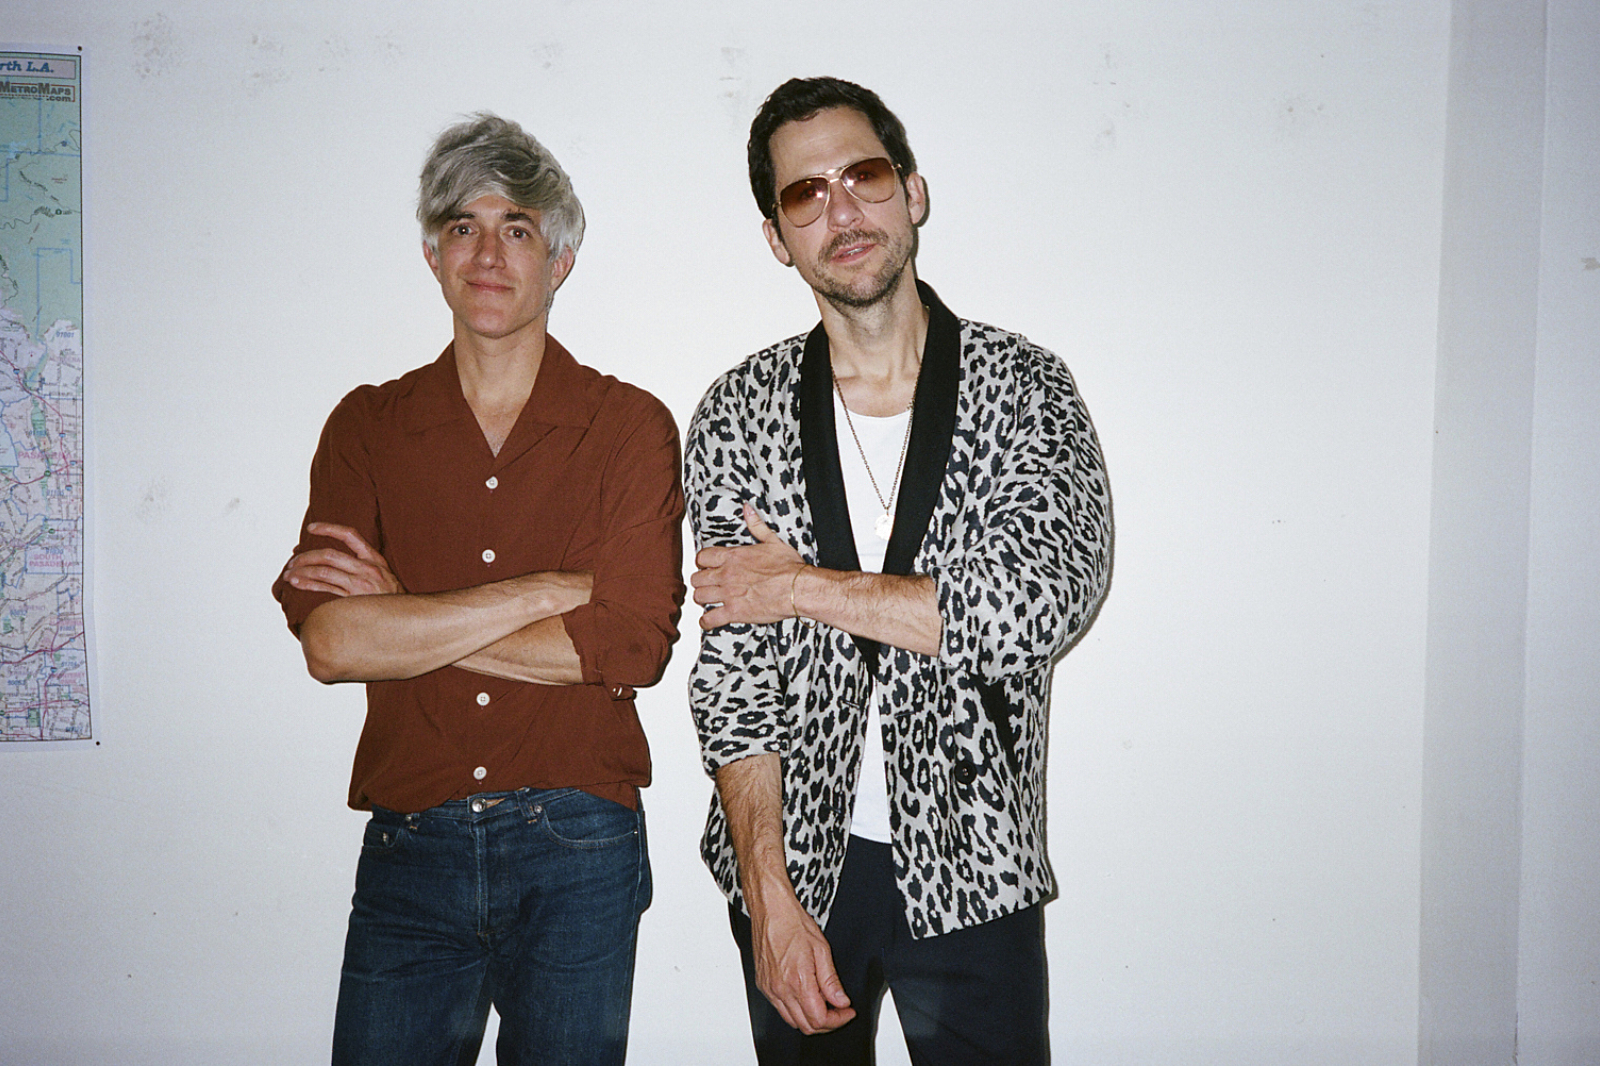 We Are Scientists share "rare moment of quiet" in new single 'Lucky Just To Be Here'